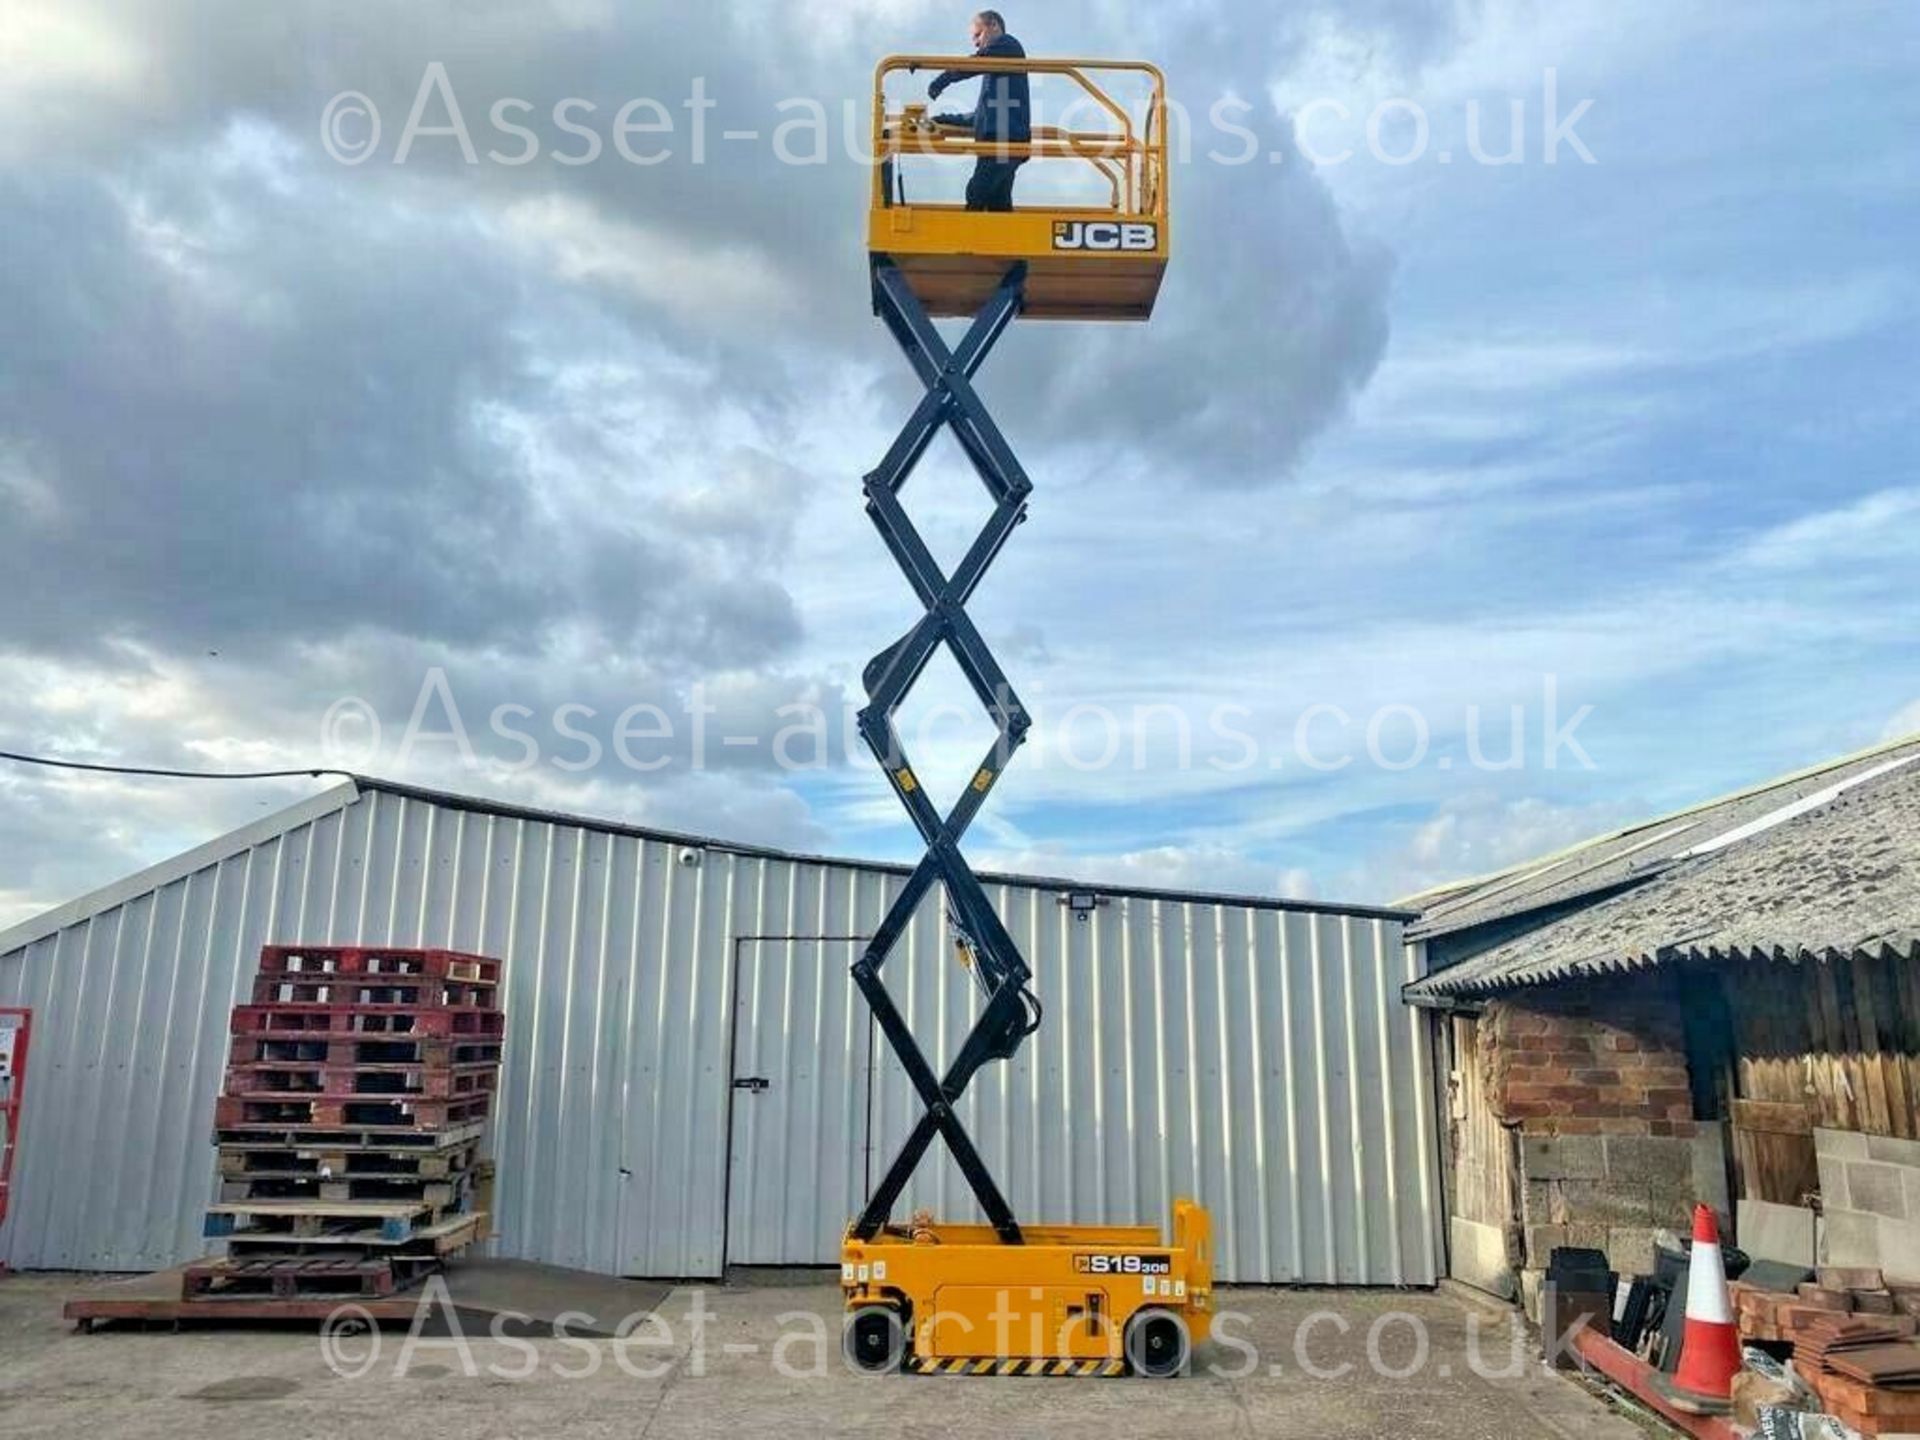 SCISSOR LIFT JCB S1930E ELECTRIC, PLATFORM HEIGHT 5.8m/ 19ft, ONLY 98.4 HOURS, YEAR 2018 *PLUS VAT* - Image 13 of 14